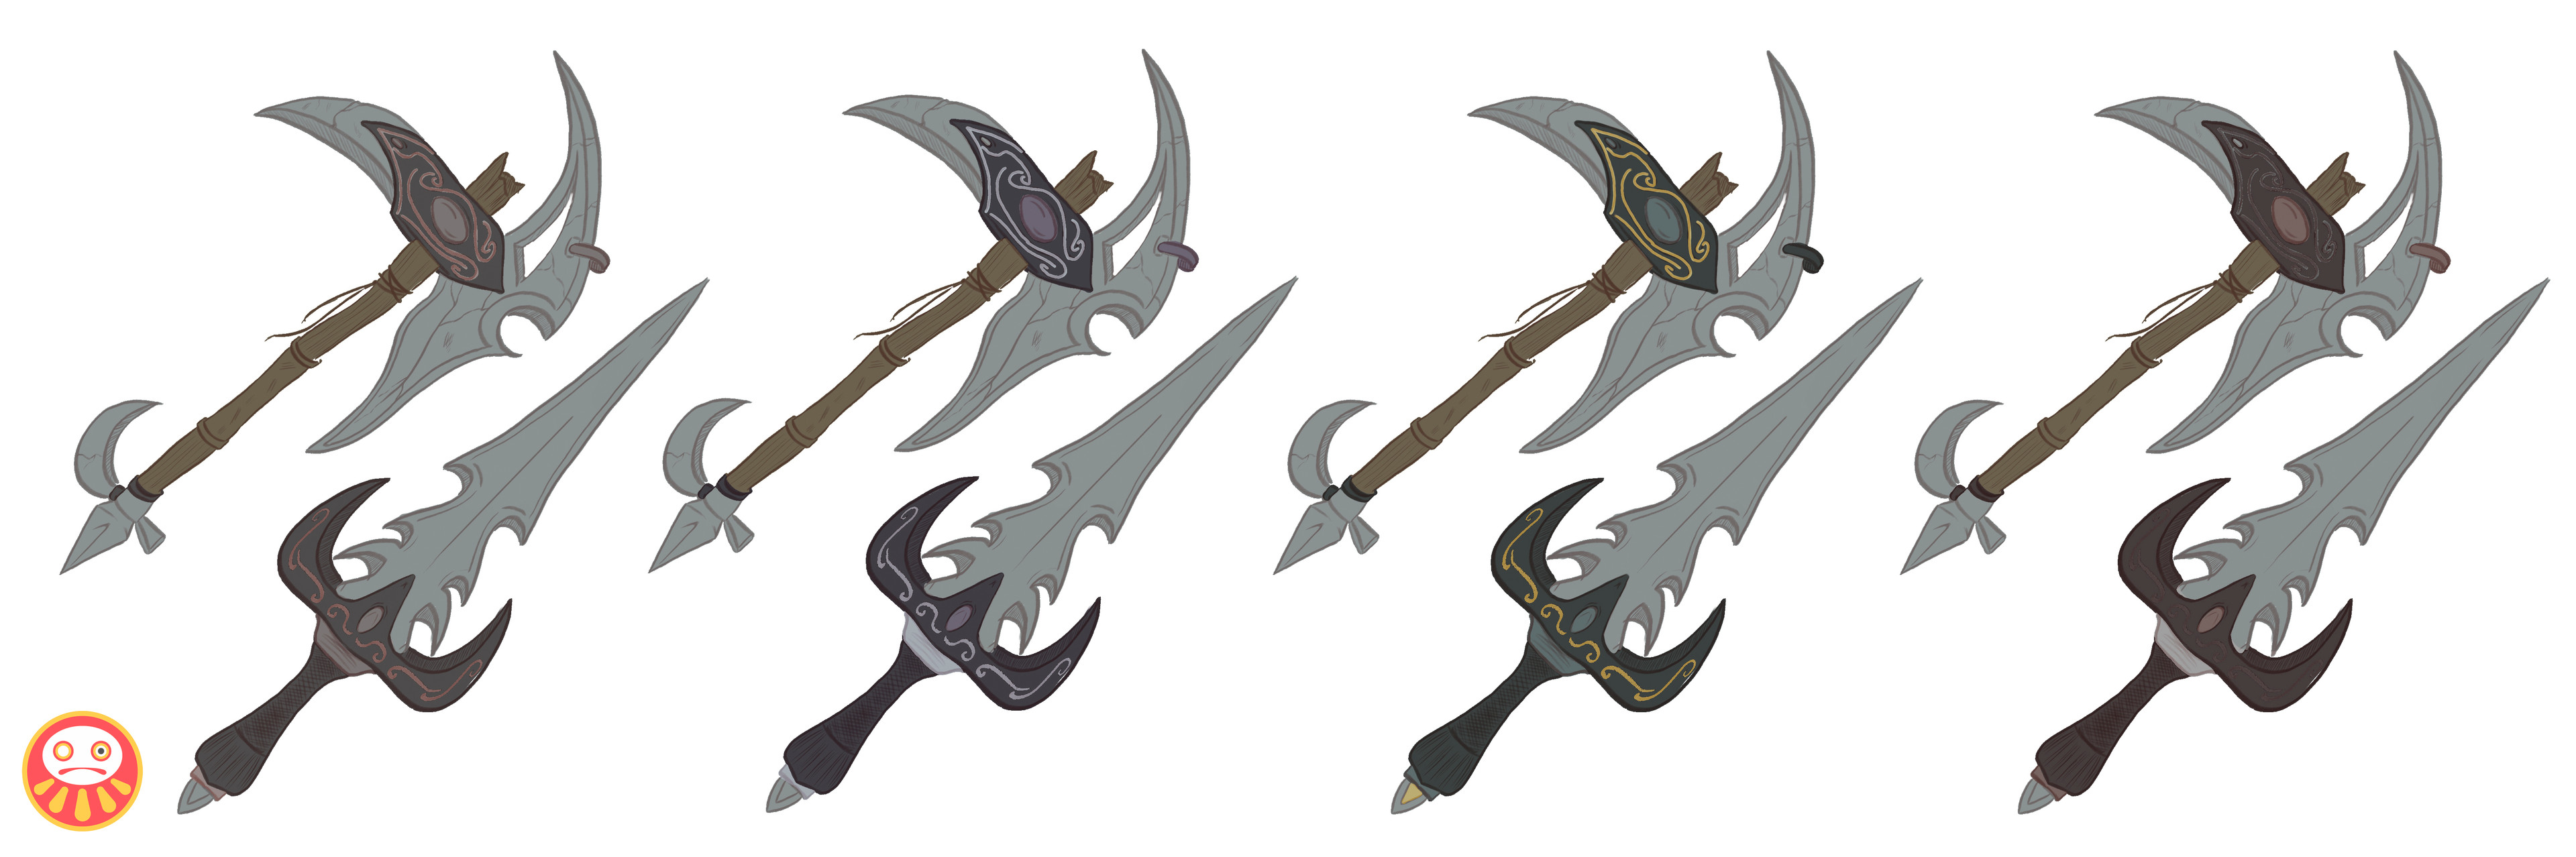 Weapon Variations